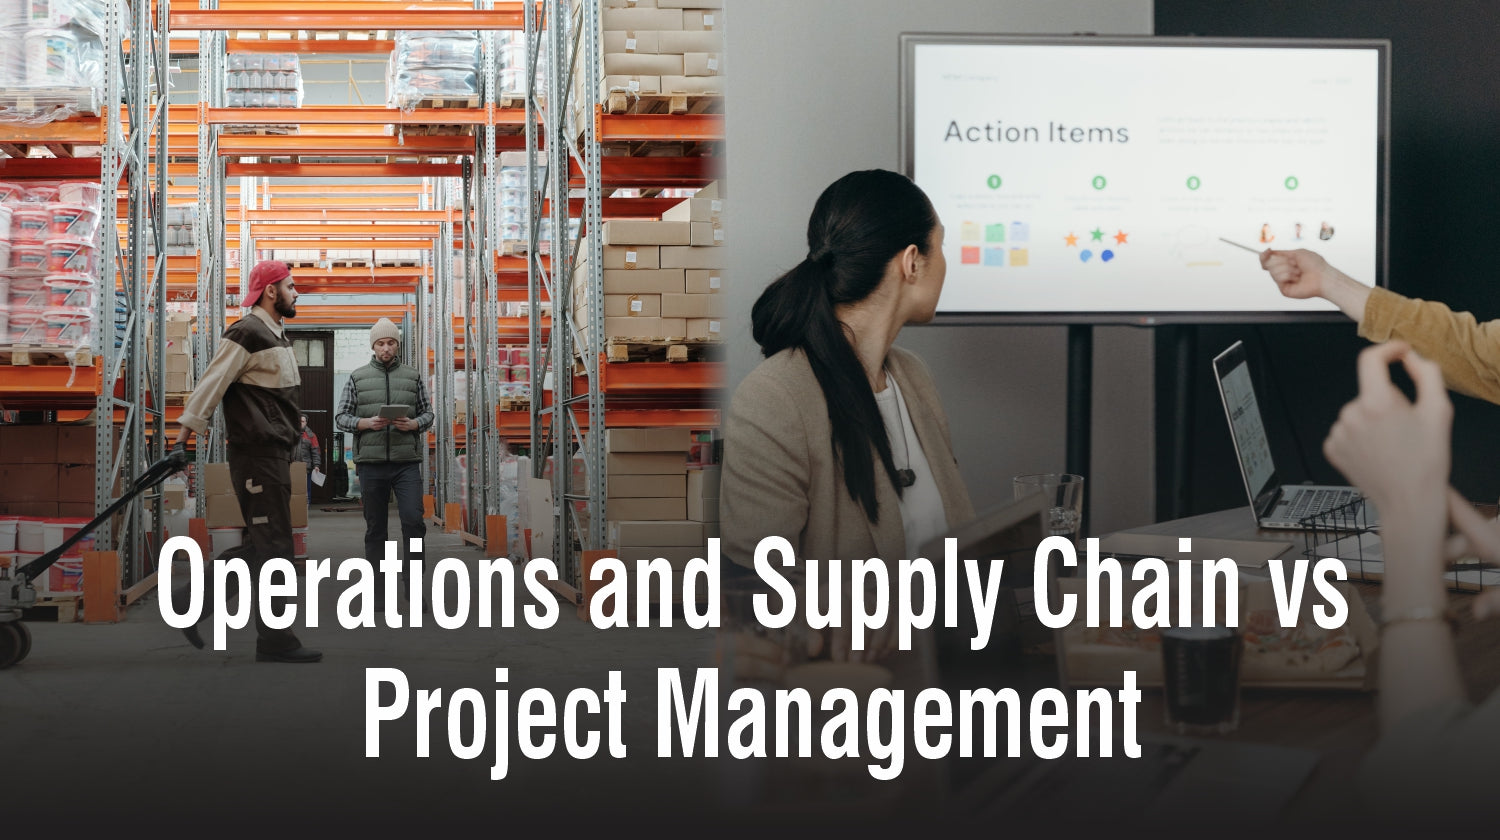 Operations and Supply Chain vs Project Management